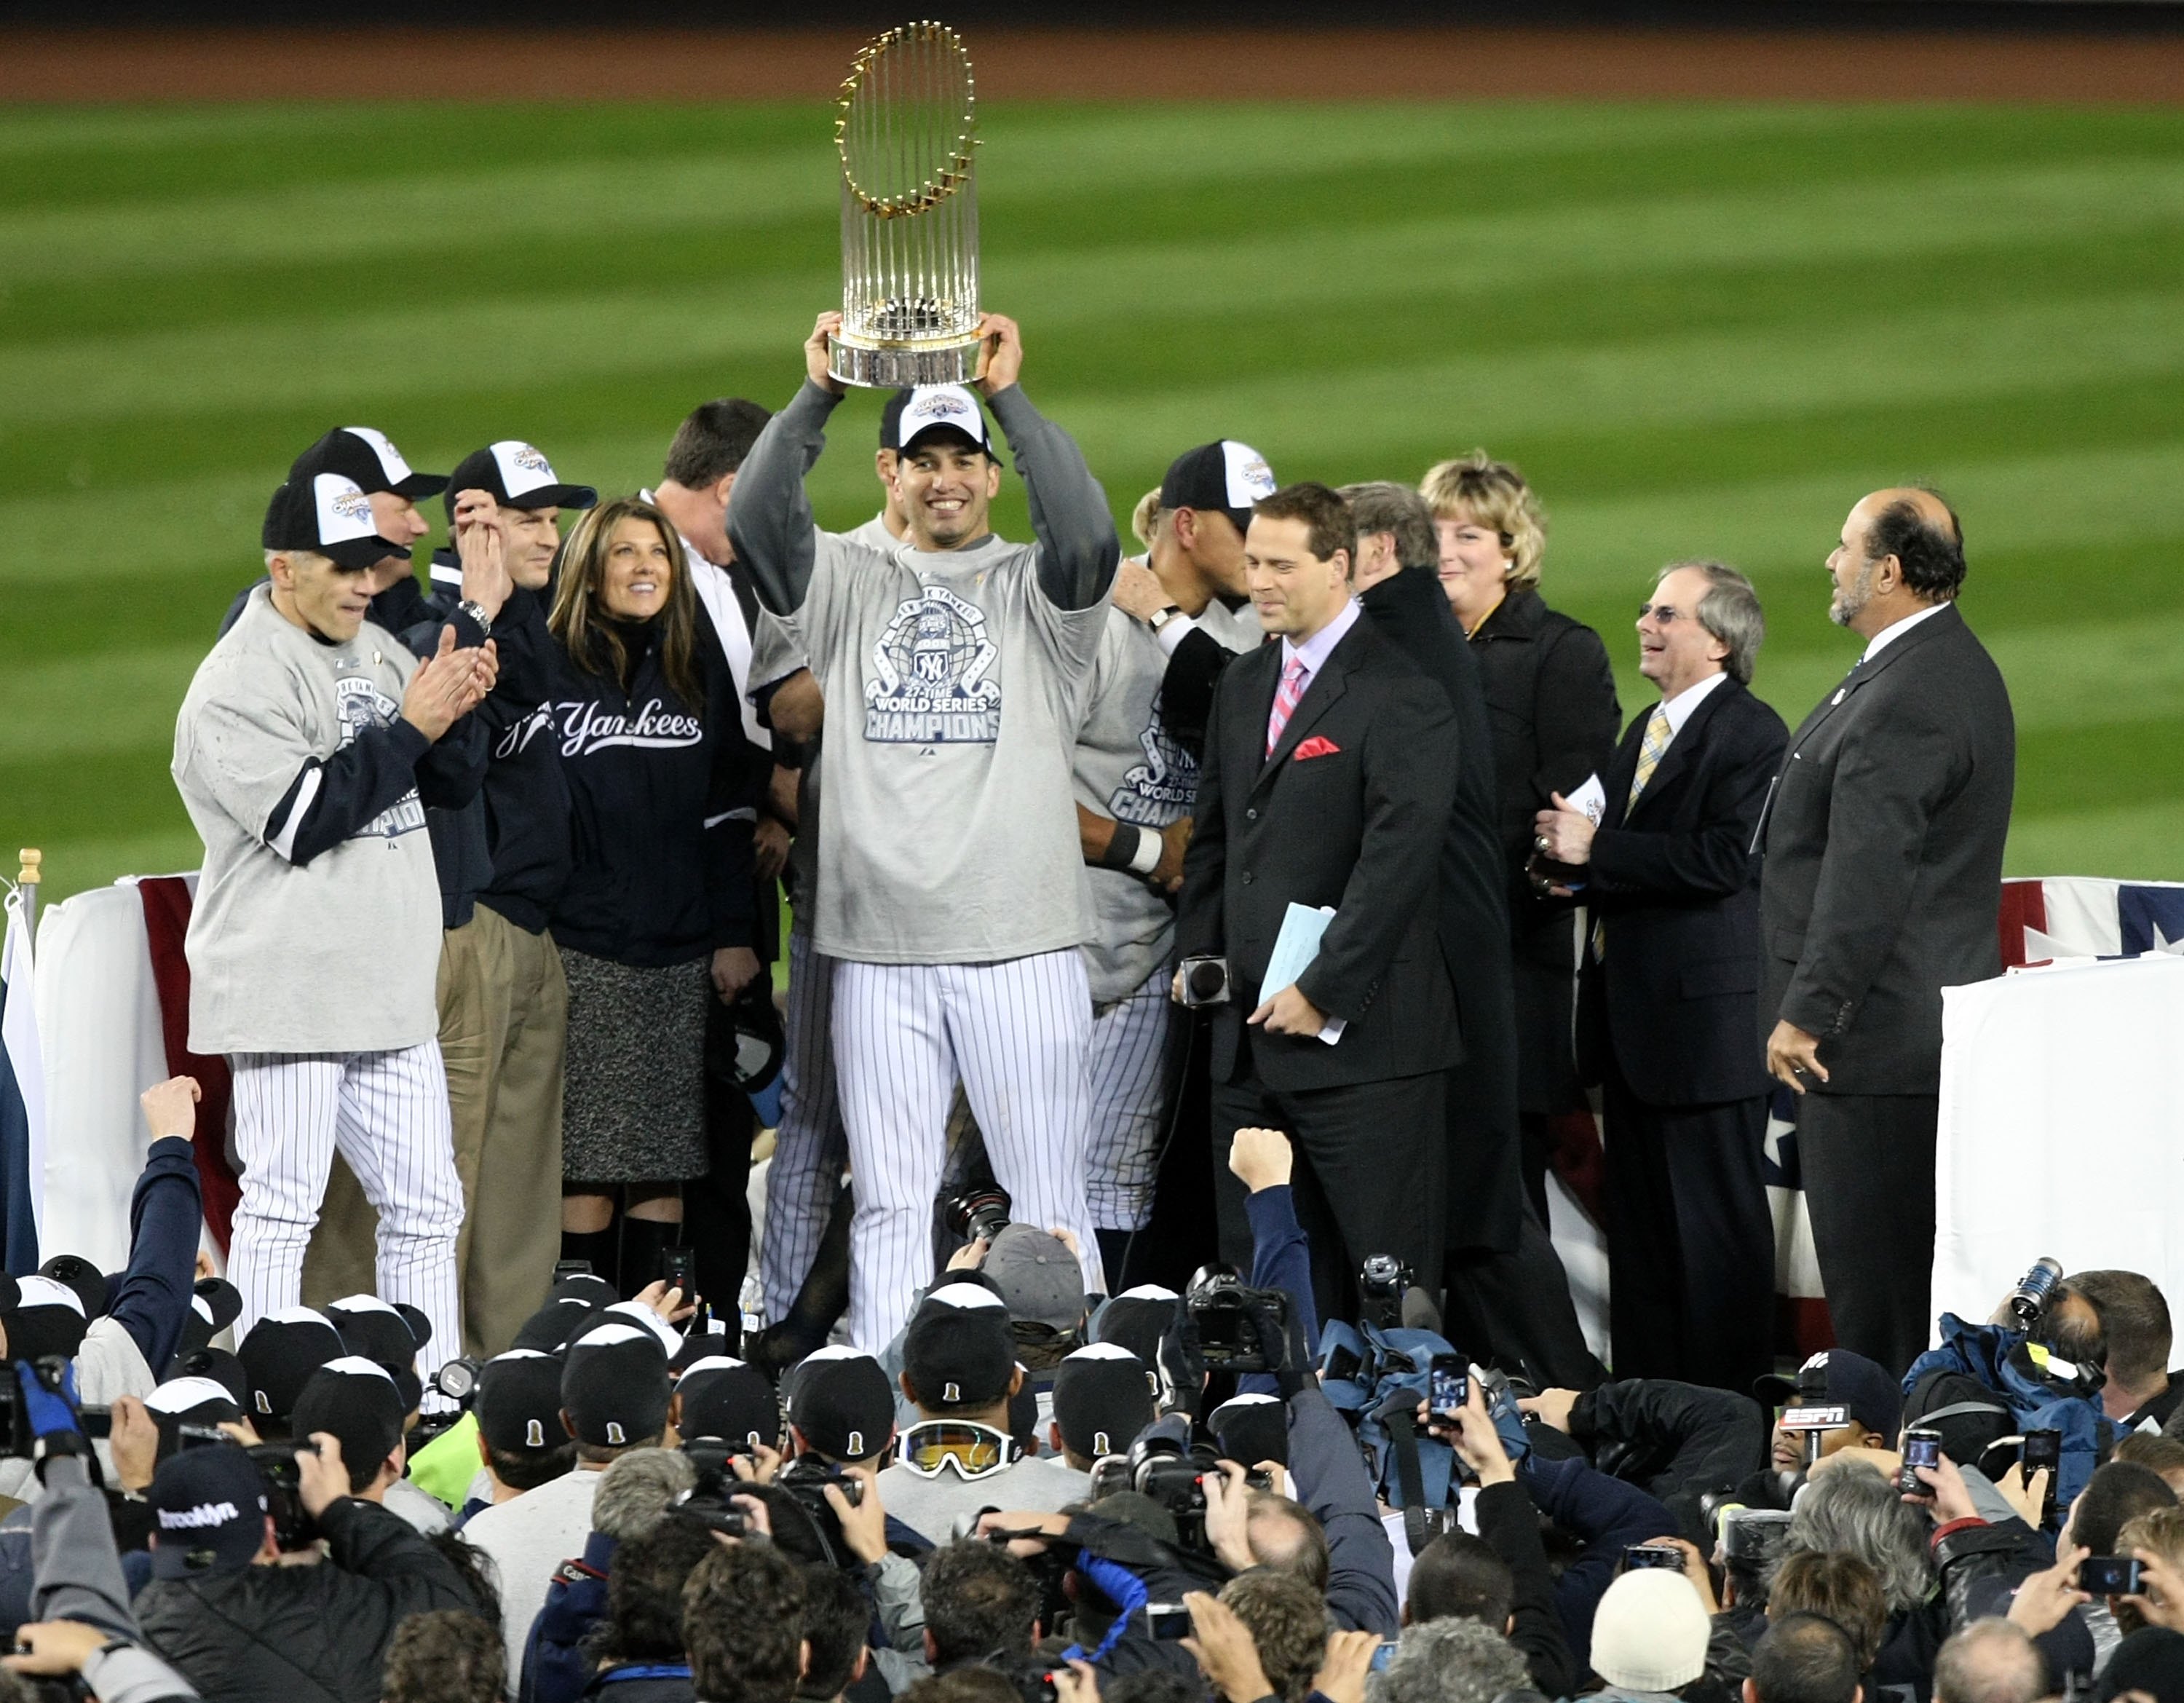 NEW YORK - NOVEMBER 04:  Andy Pettitte #46 of the New York Yankees celebrates with the trophy after their 7-3 win against the Philadelphia Phillies in Game Six of the 2009 MLB World Series at Yankee Stadium on November 4, 2009 in the Bronx borough of New